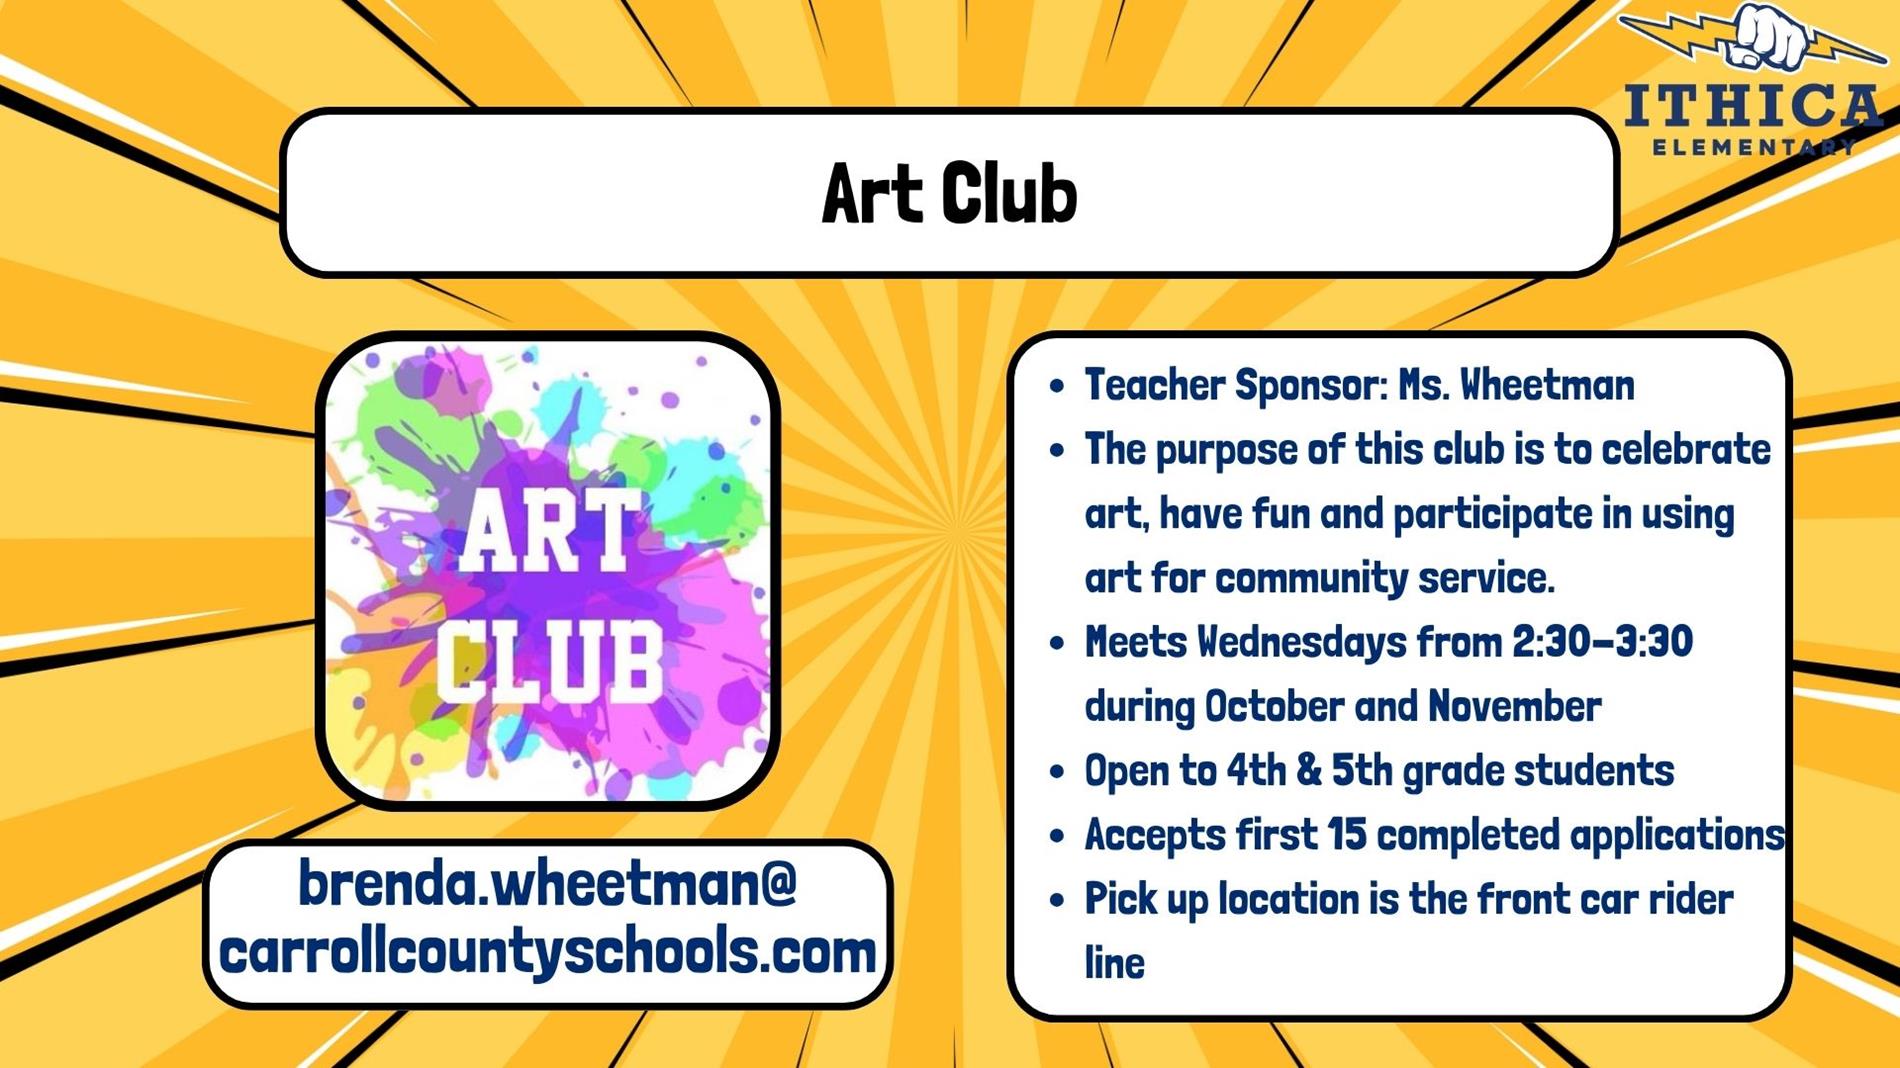 information about the art club